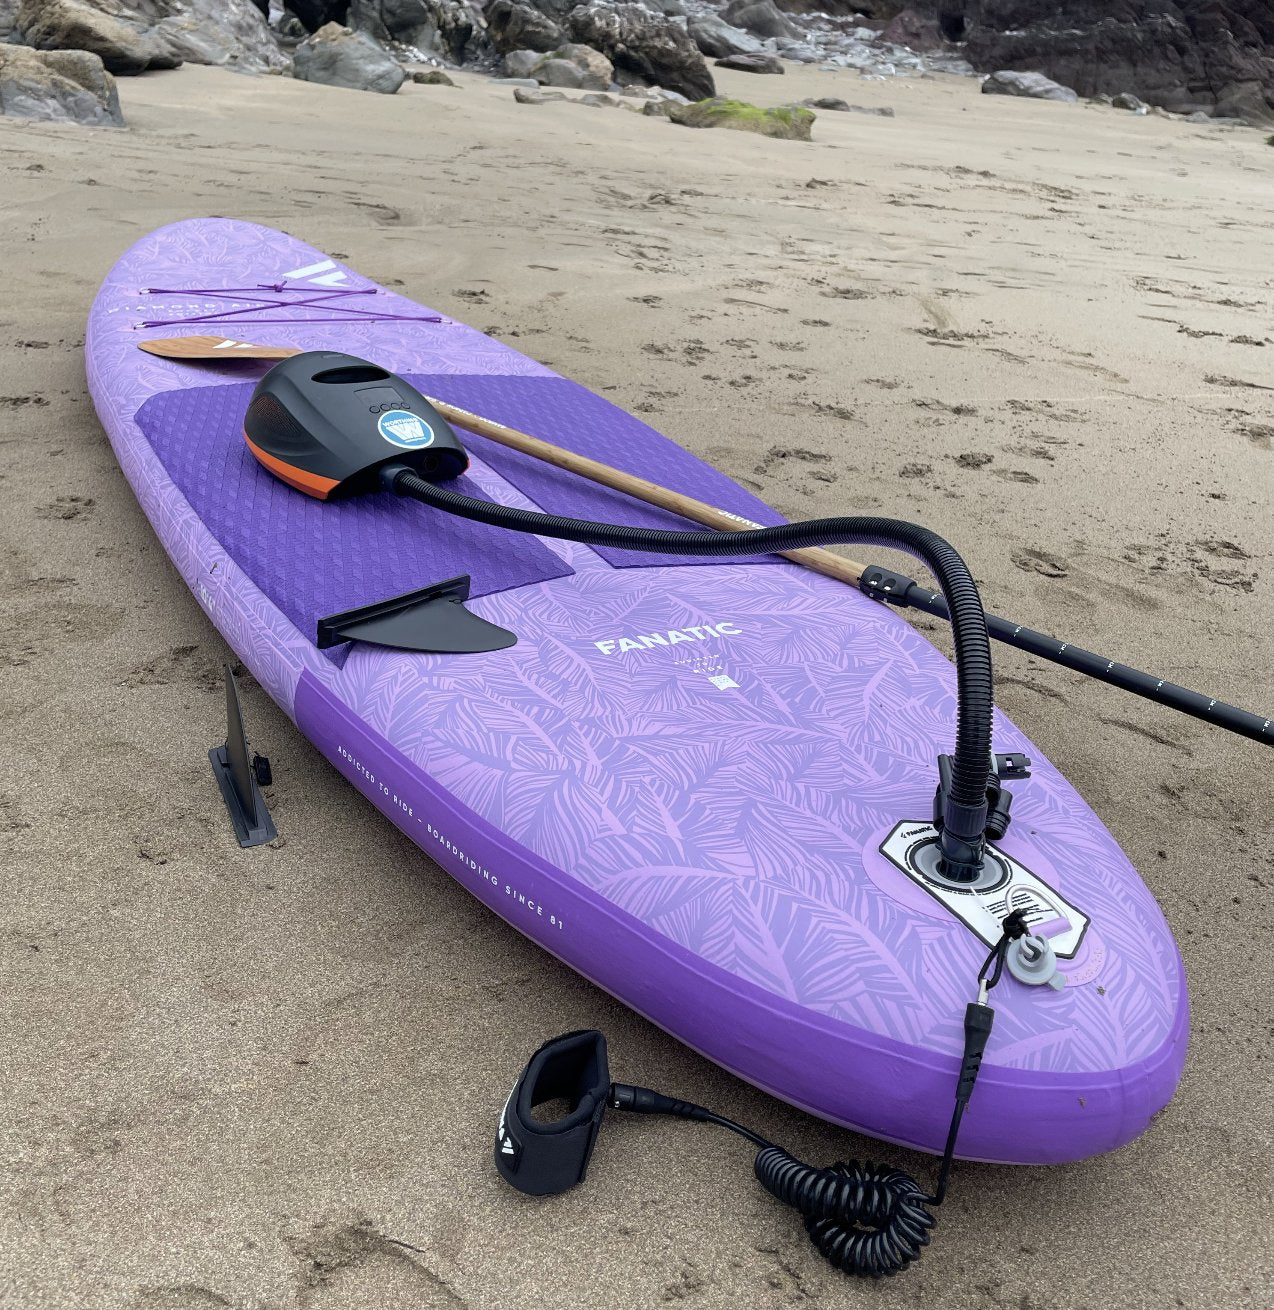 Outdoor Master Orca 20psi Battery Powered Electric Stand Up Paddle iSUP, wing, Kite and Kayak pump - Worthing Watersports - Pumps - Outdoor Master